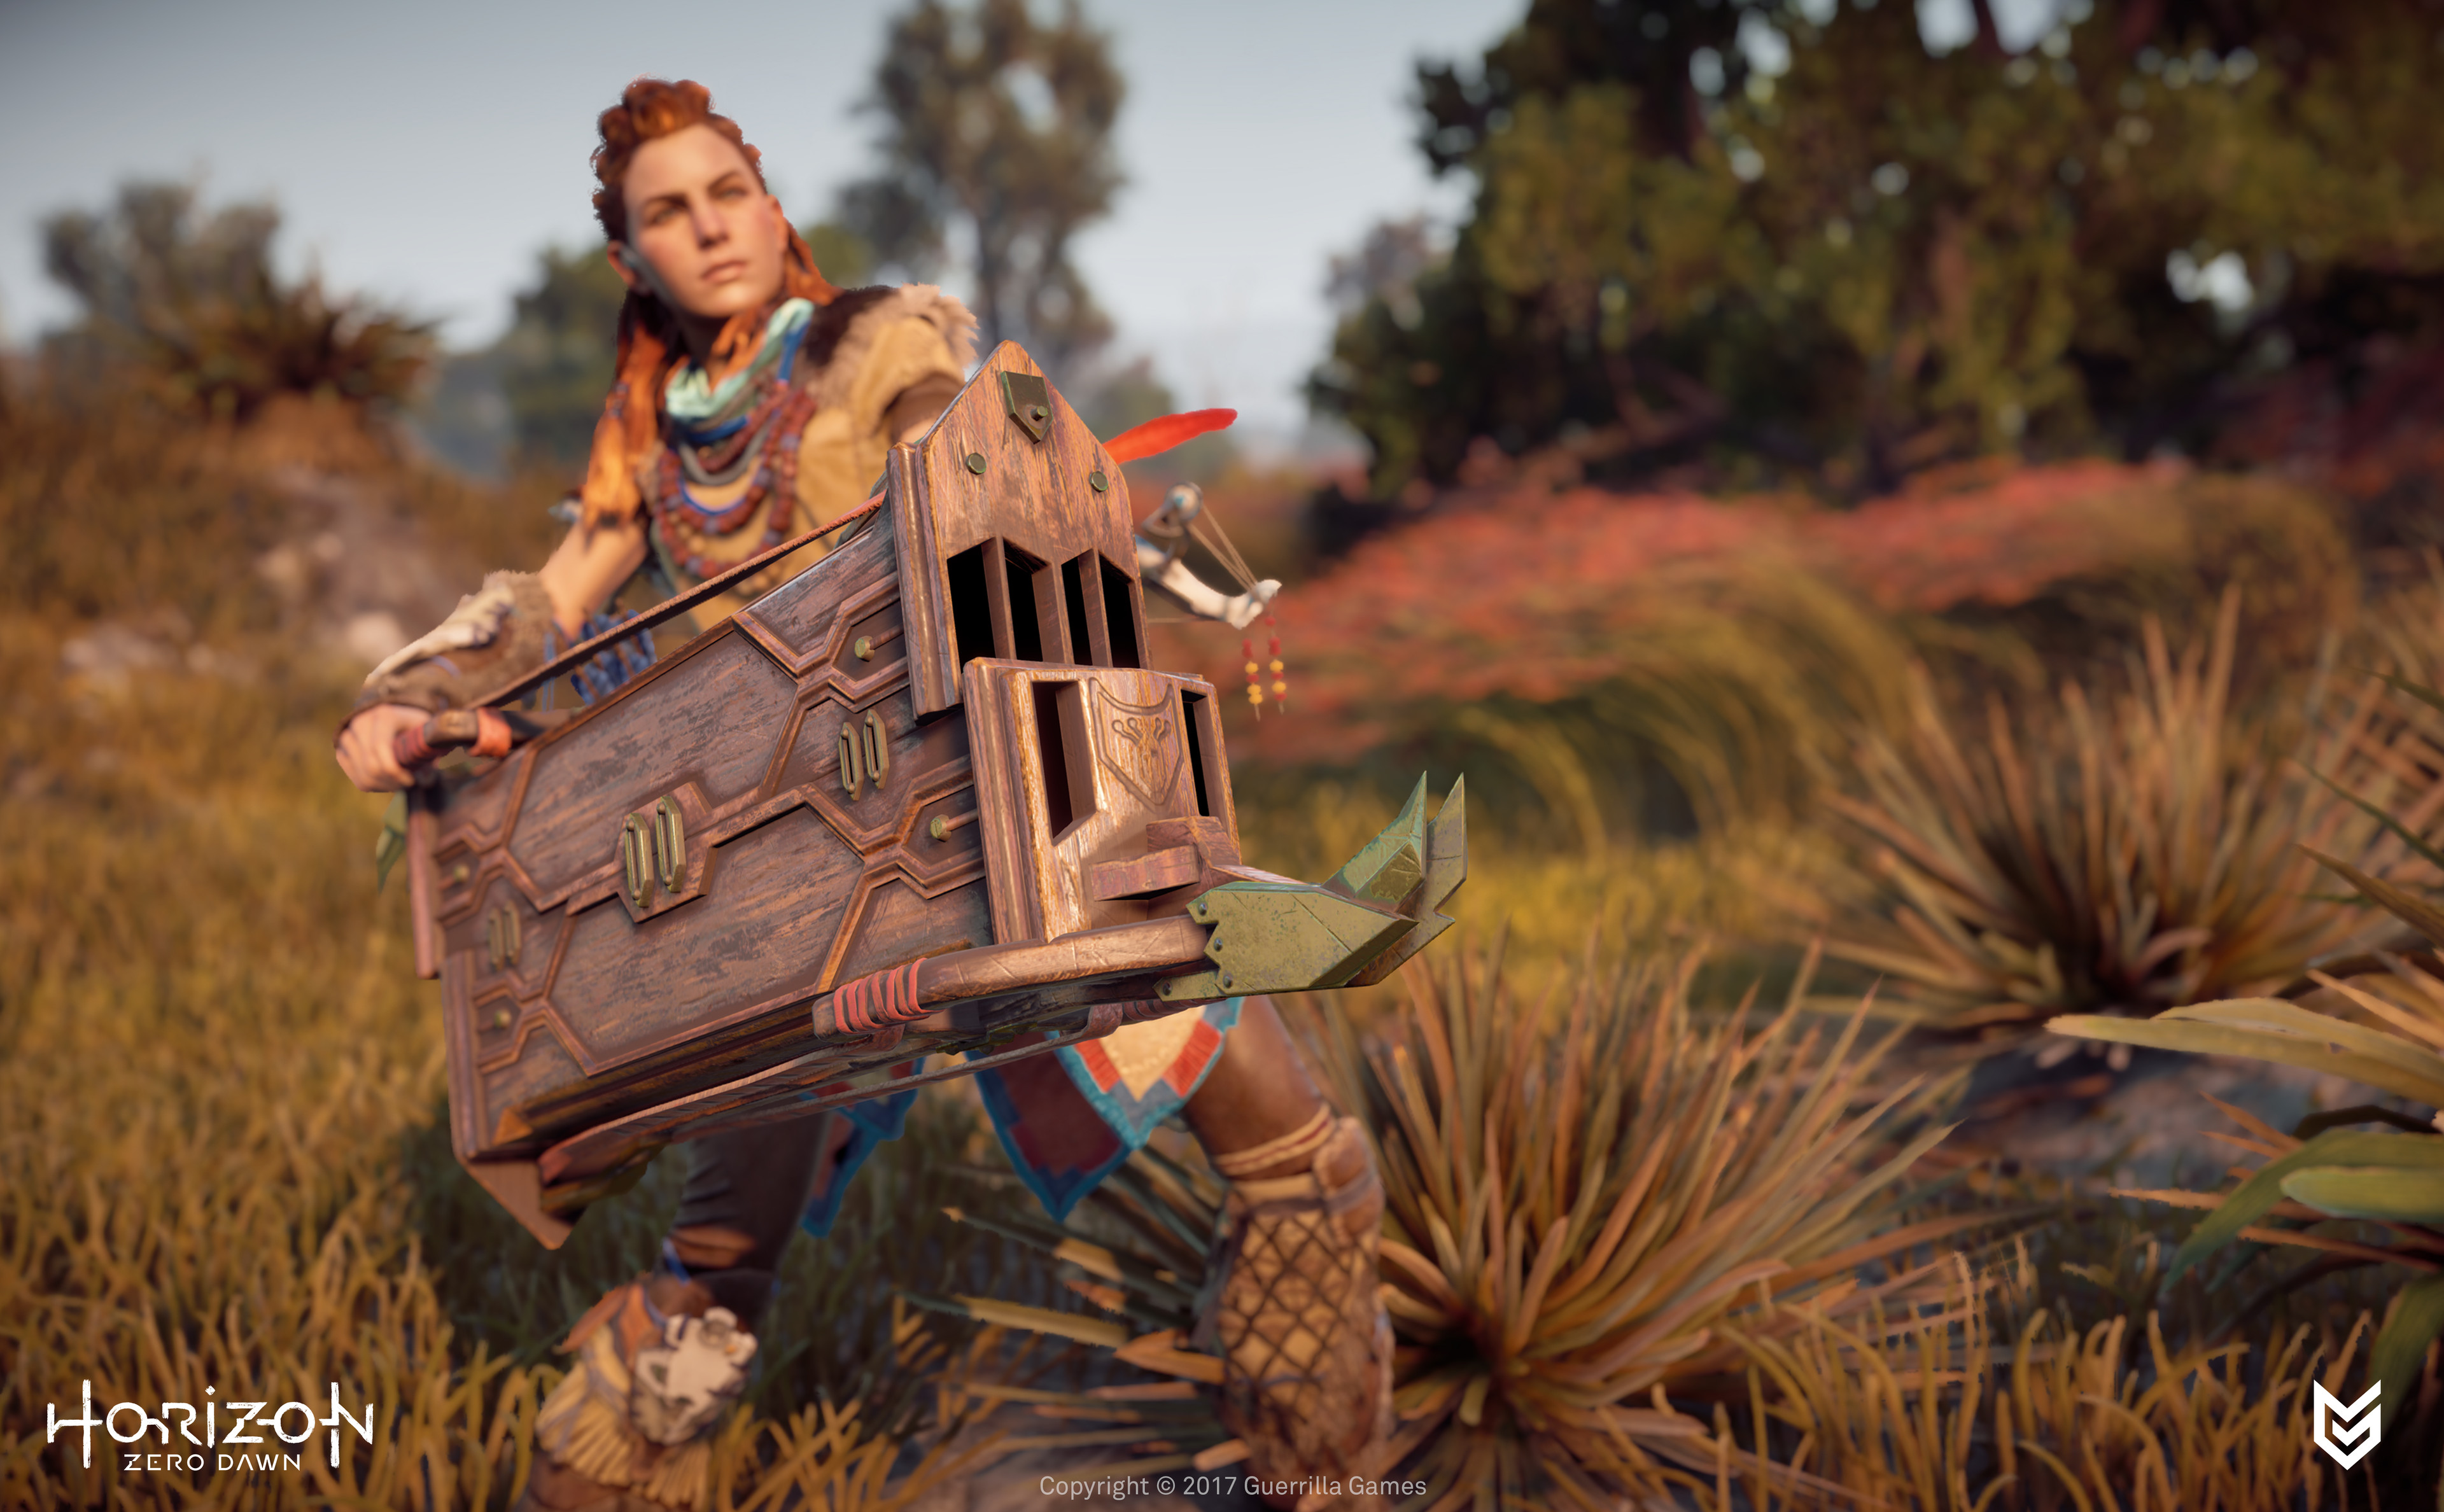 Horizon Zero Dawn returns to Steam charts, while Lethal Company continues  to tower above CS2, PUBG, and other hits